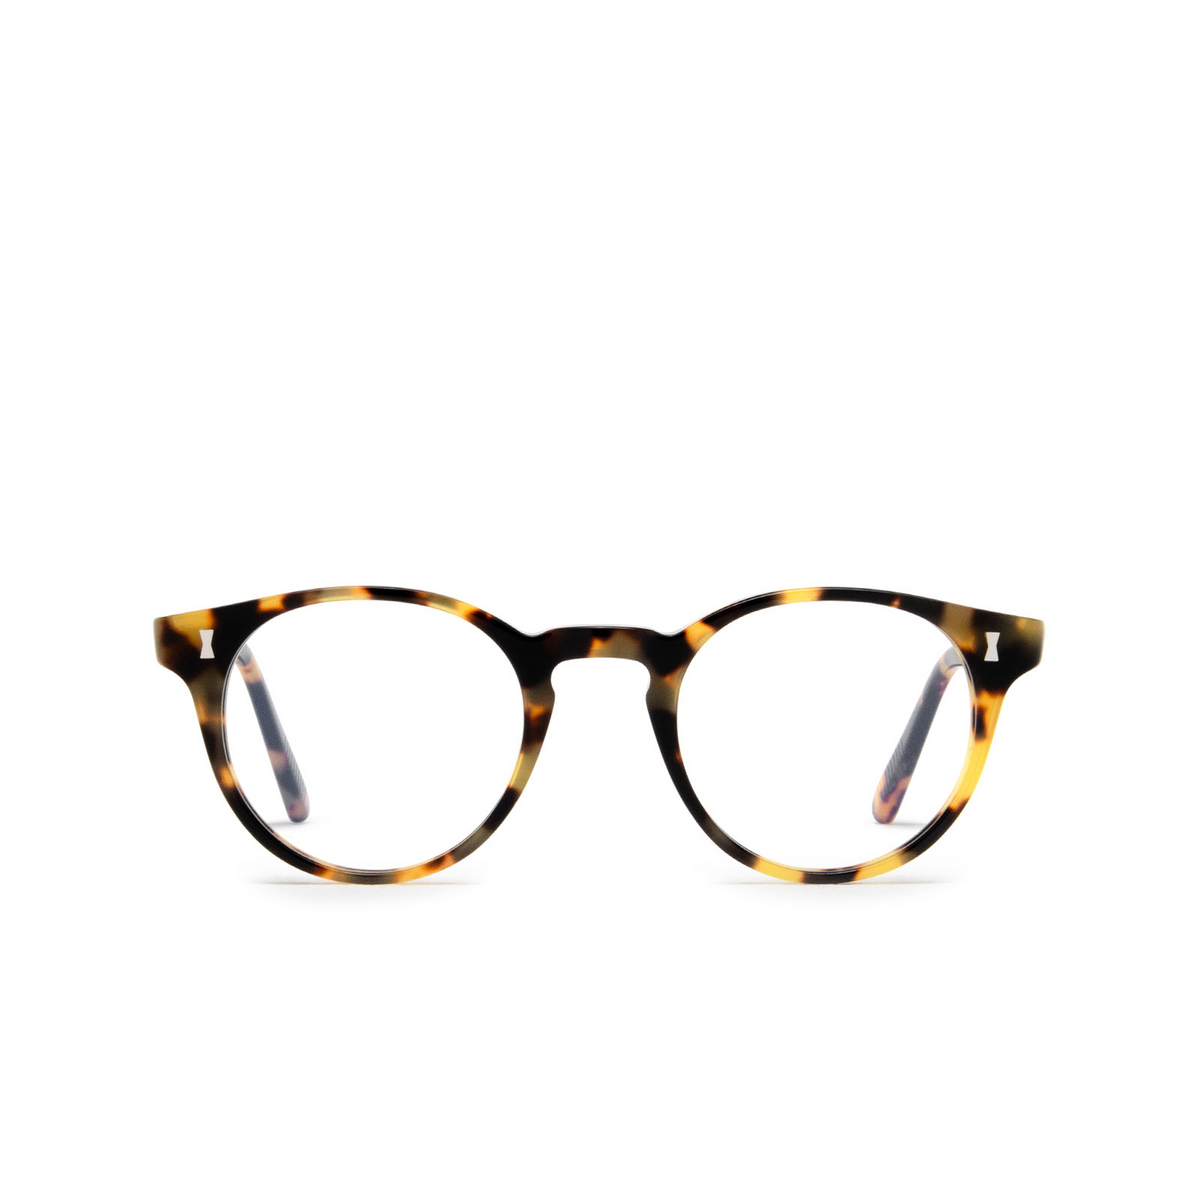 Cubitts HERBRAND Eyeglasses HER-R-CAM Camo - front view